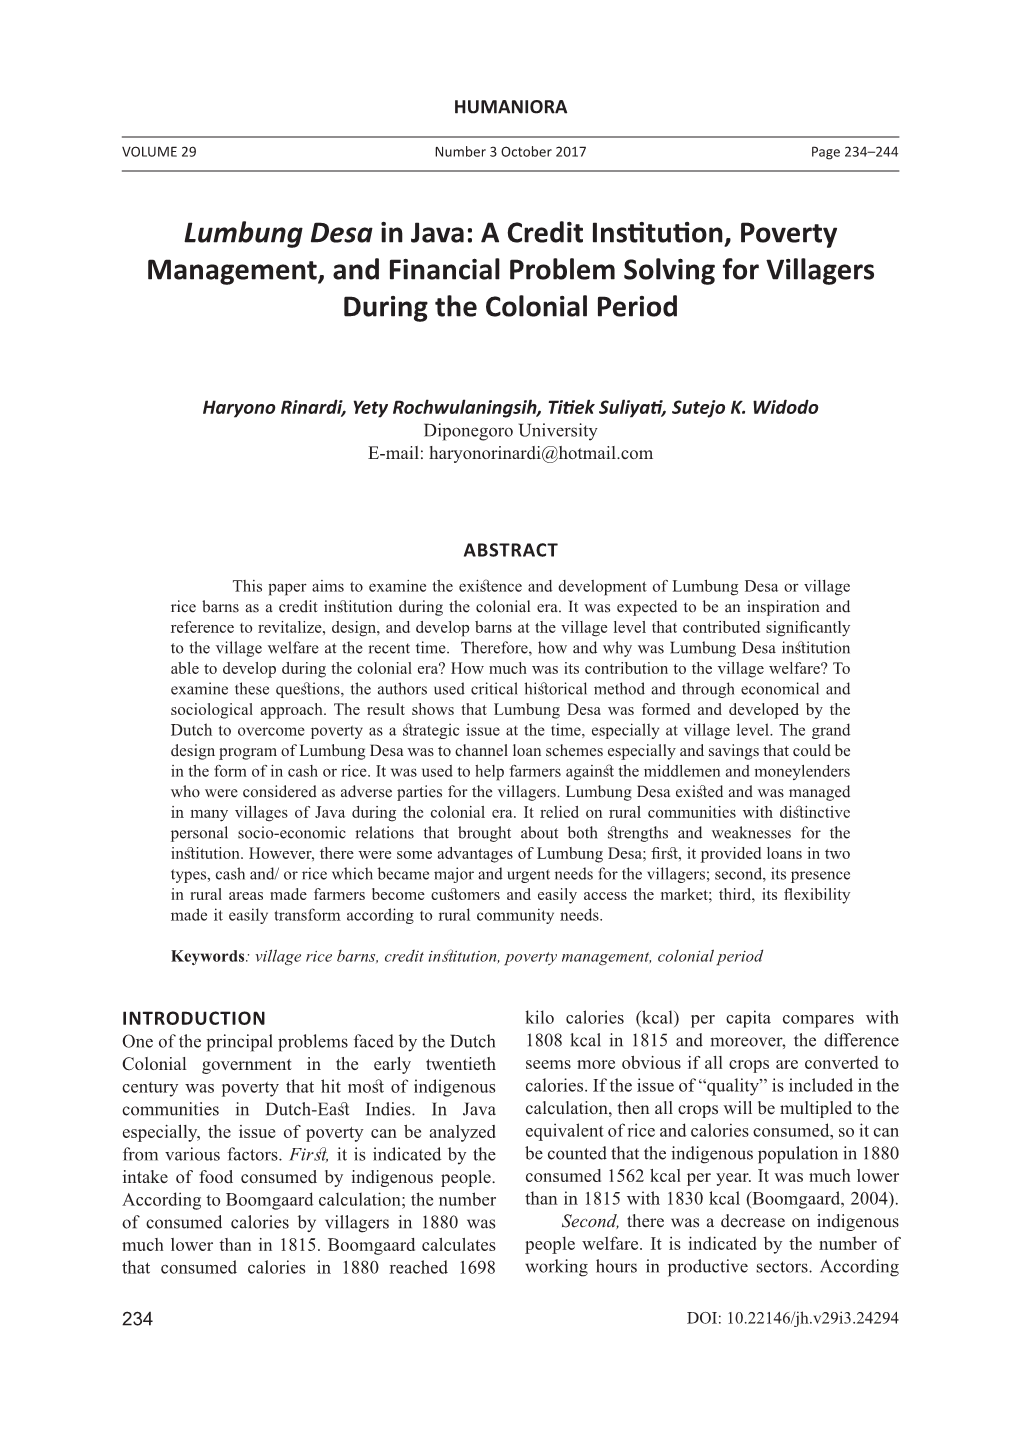 Lumbung Desa in Java: a Credit Institution, Poverty Management, and Financial Problem Solving for Villagers During the Colonial Period